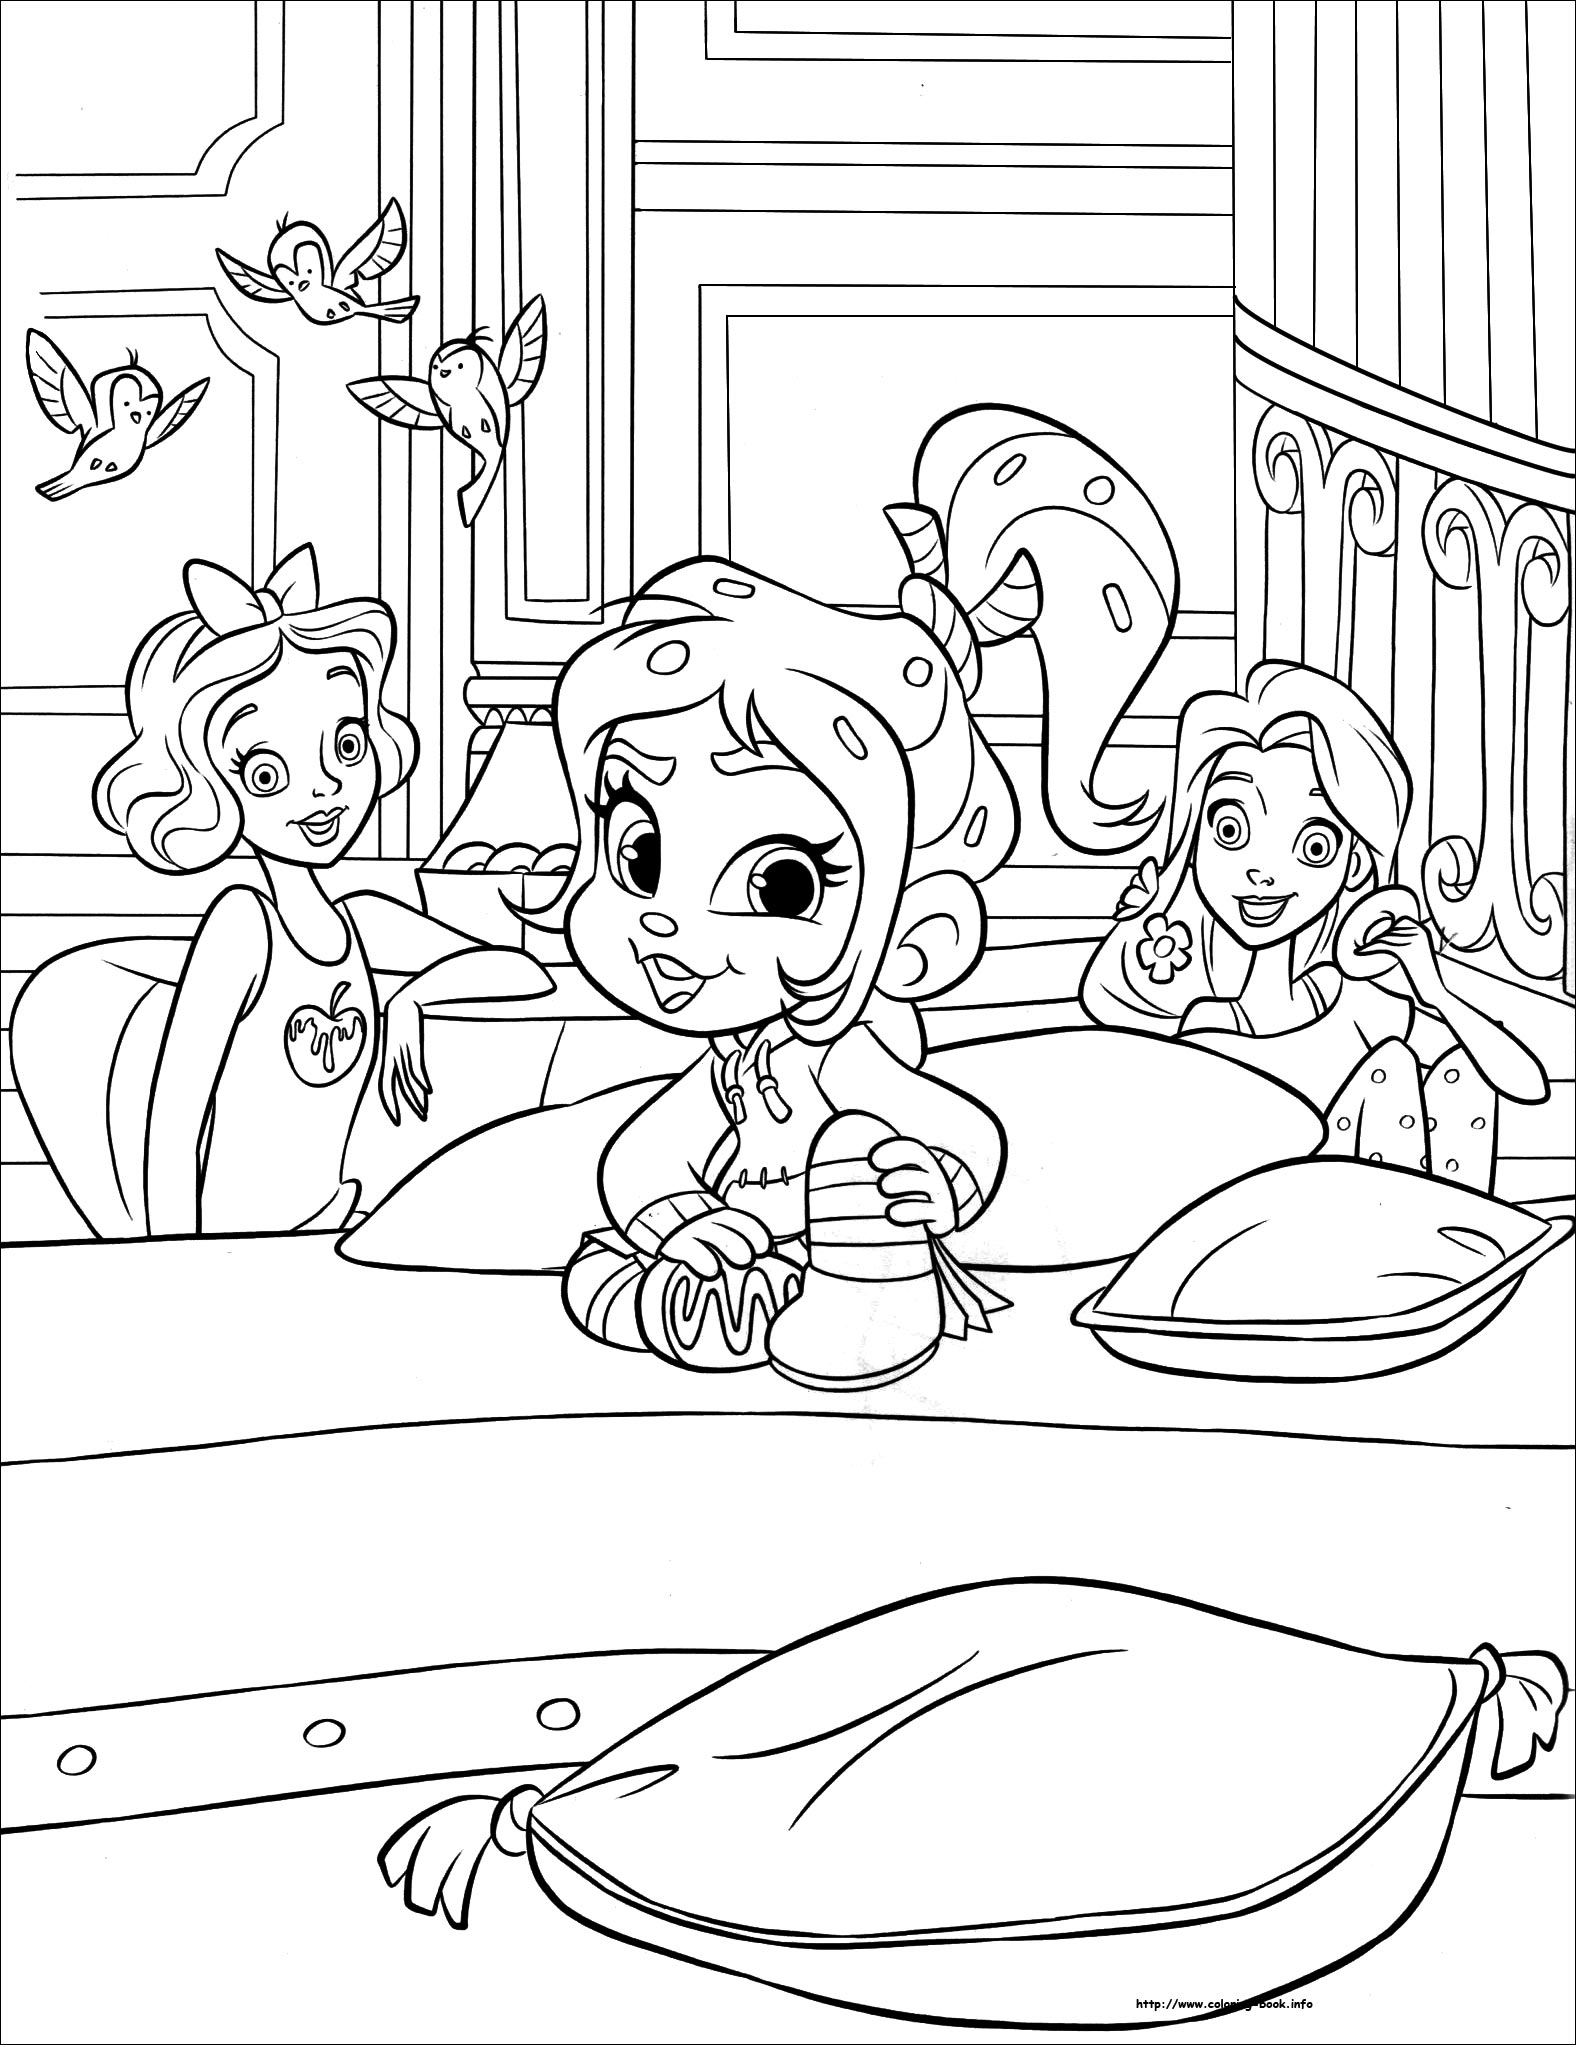 Ralph breaks the Internet coloring picture